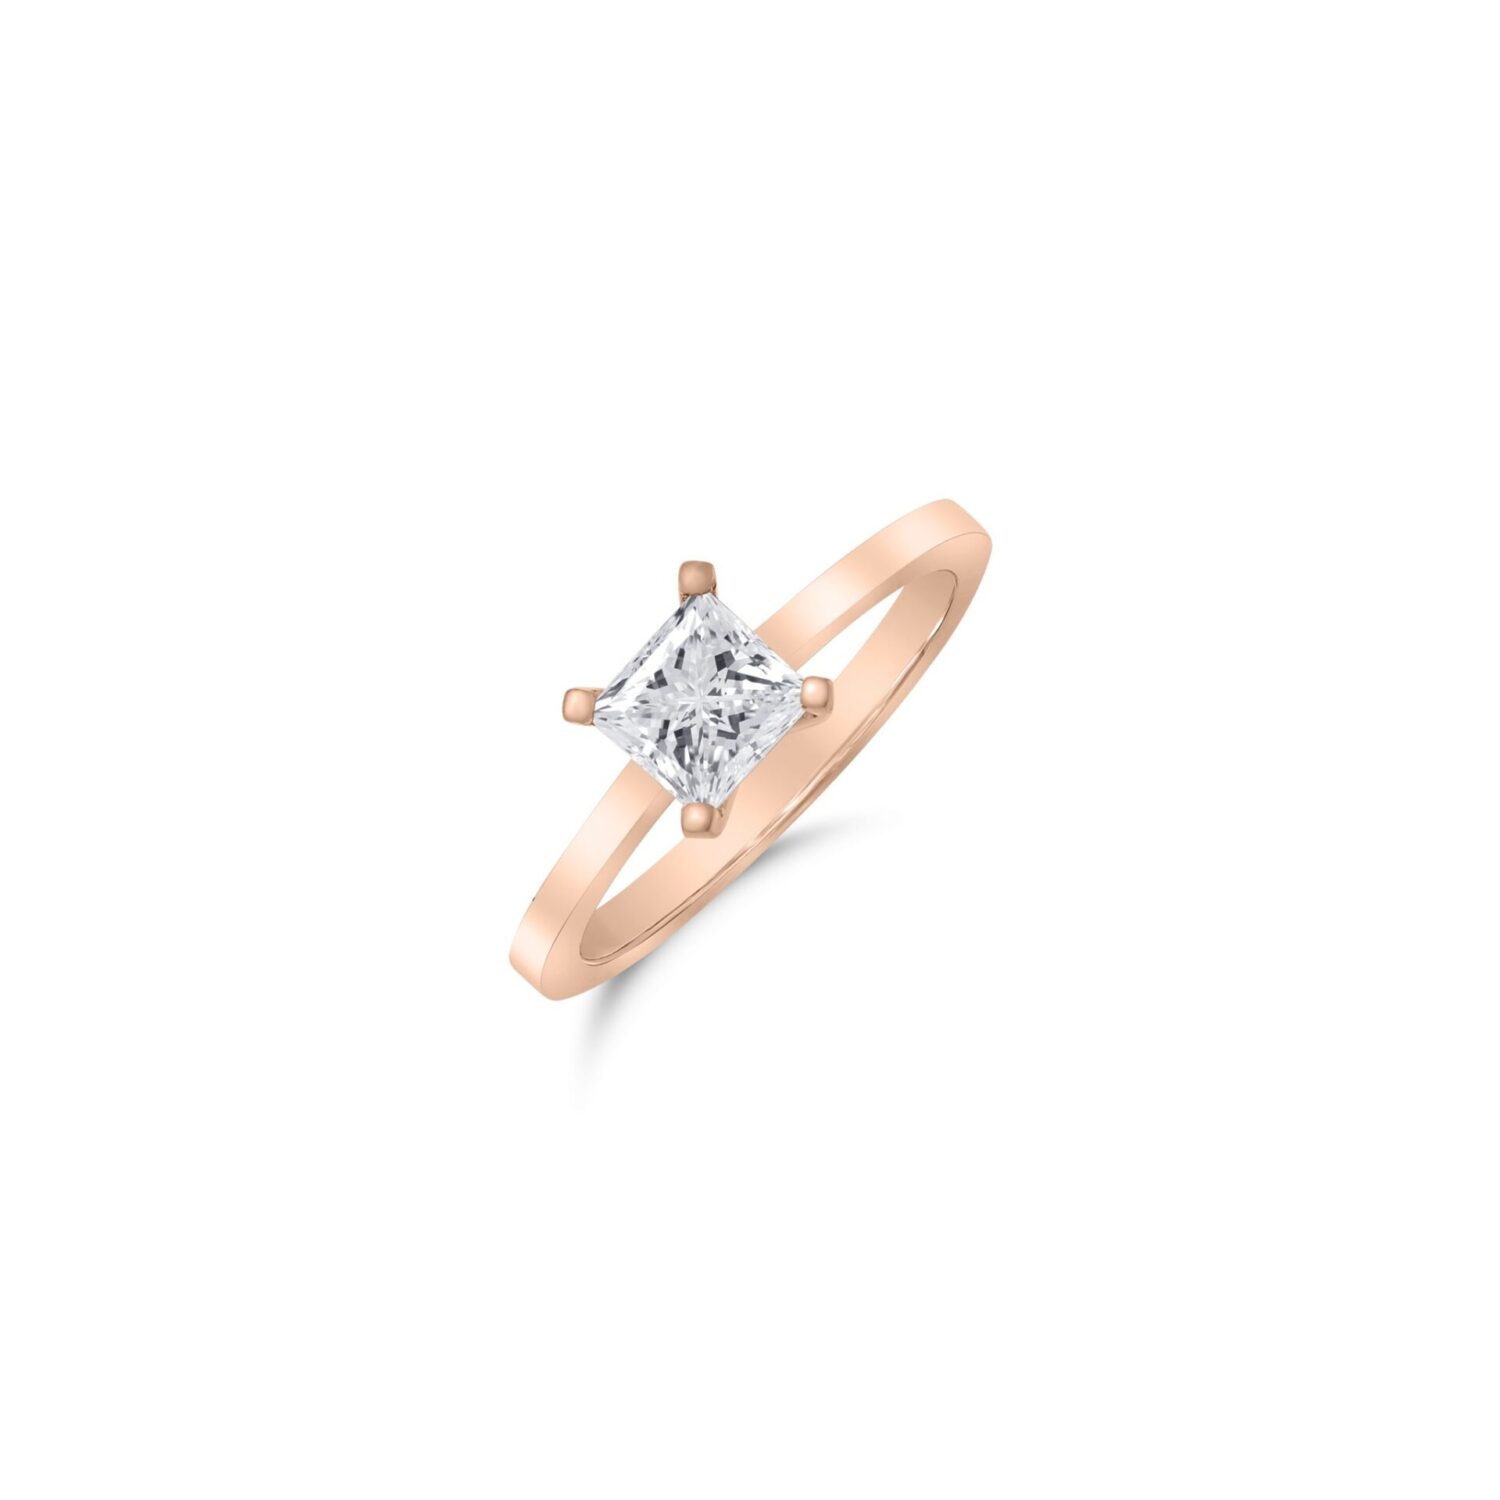 Lab grown diamonds in Cyprus - Princes  Diamond Ring  1 Carat - Rose Gold best quality and price